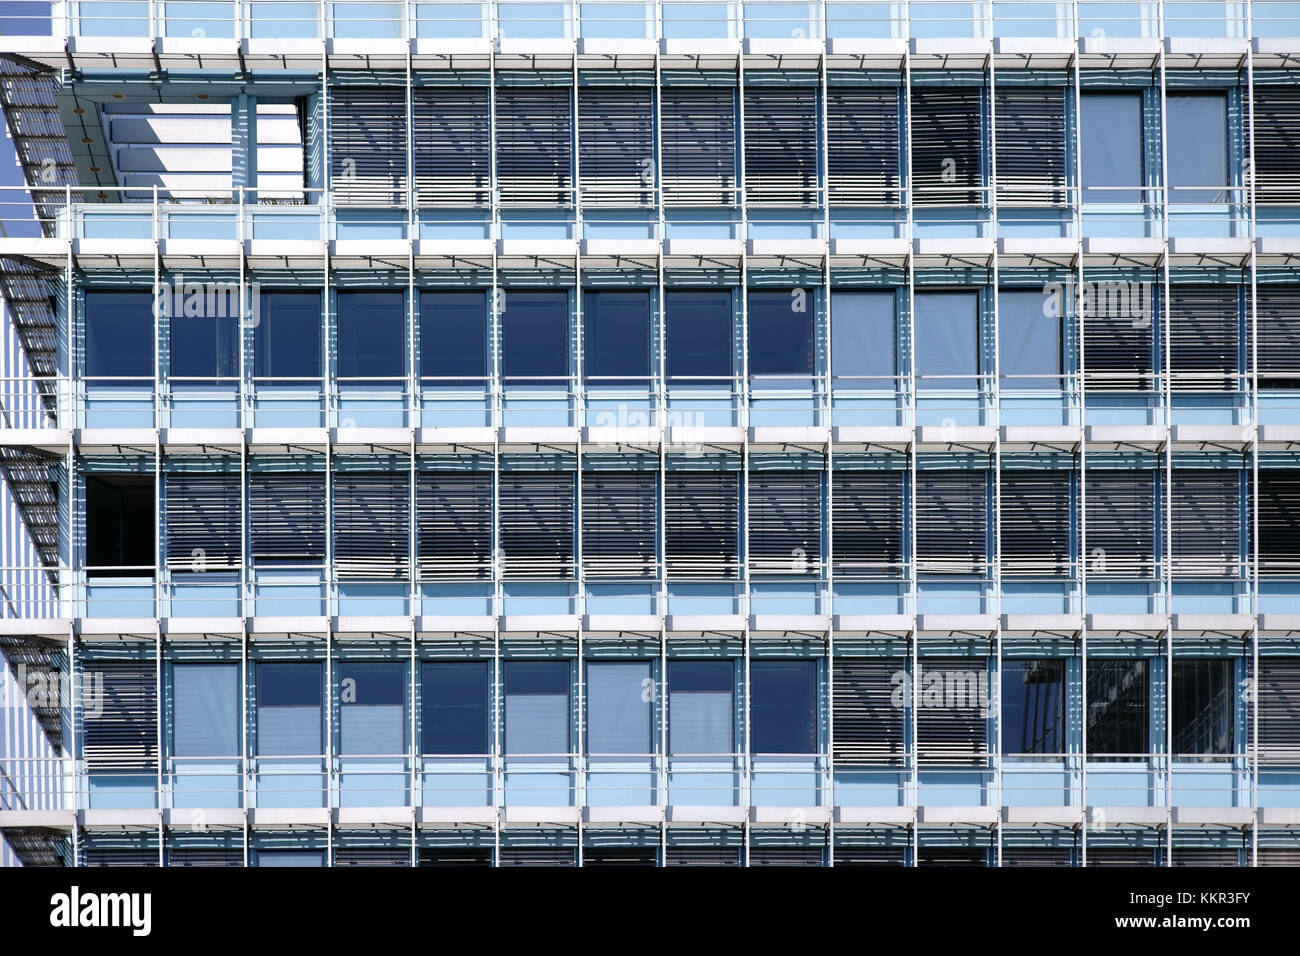 The modern facade of an office building with rows of windows and metal Venetian blinds. Stock Photo